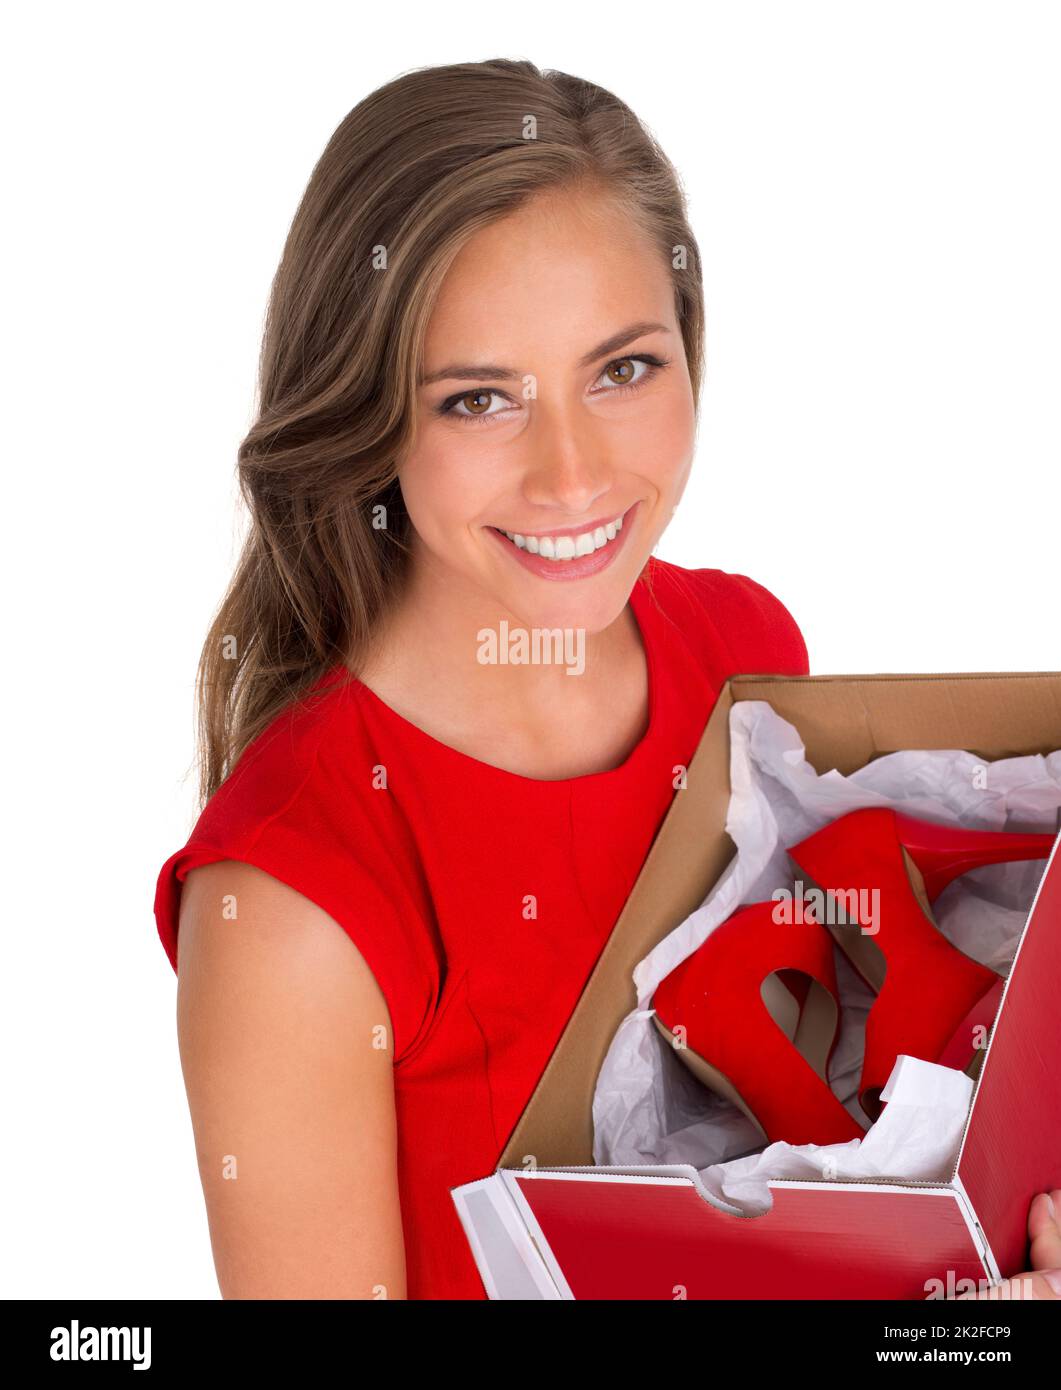 She keeps up to date with the latest fashion trends. High angle shot of an attractive young woman holding a box of new high heels against a white background. Stock Photo